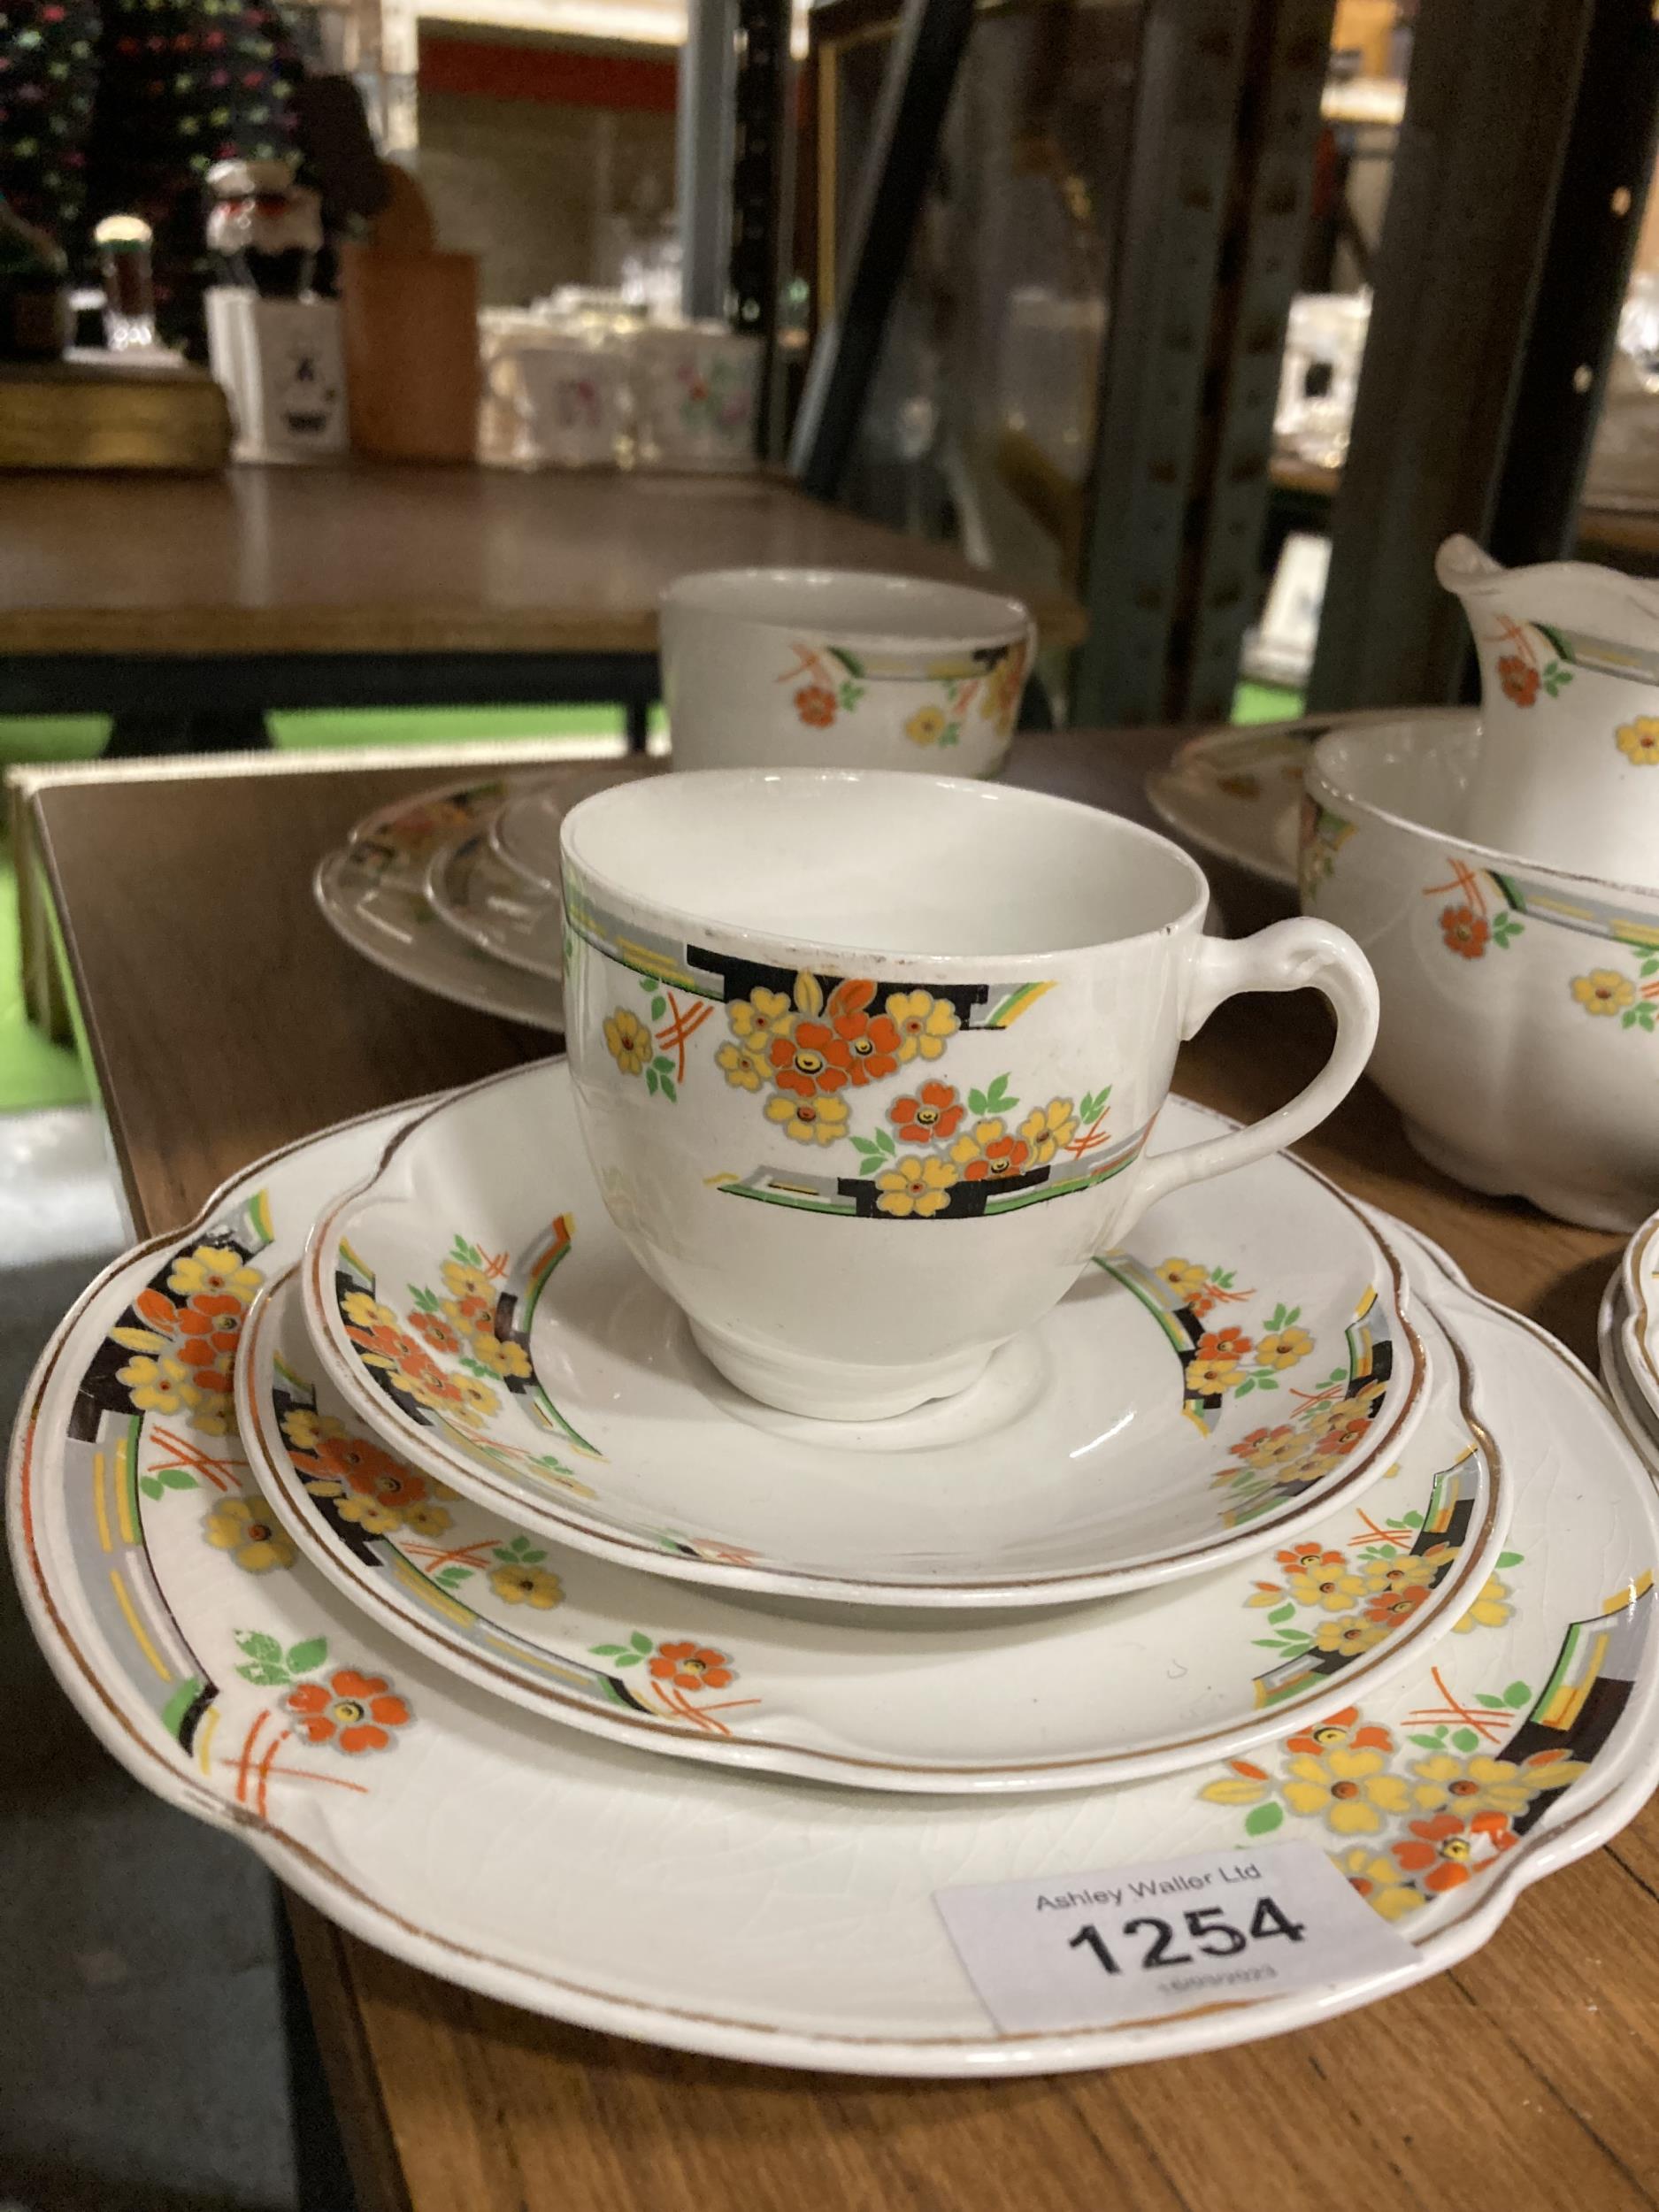 A QUANTITY OF VINTAGE JOHNSON BROS 'FLORIDA' PATTERN TEAWARE TO INCLUDE PLATES, CUPS, SAUCERS, EGG - Image 2 of 3